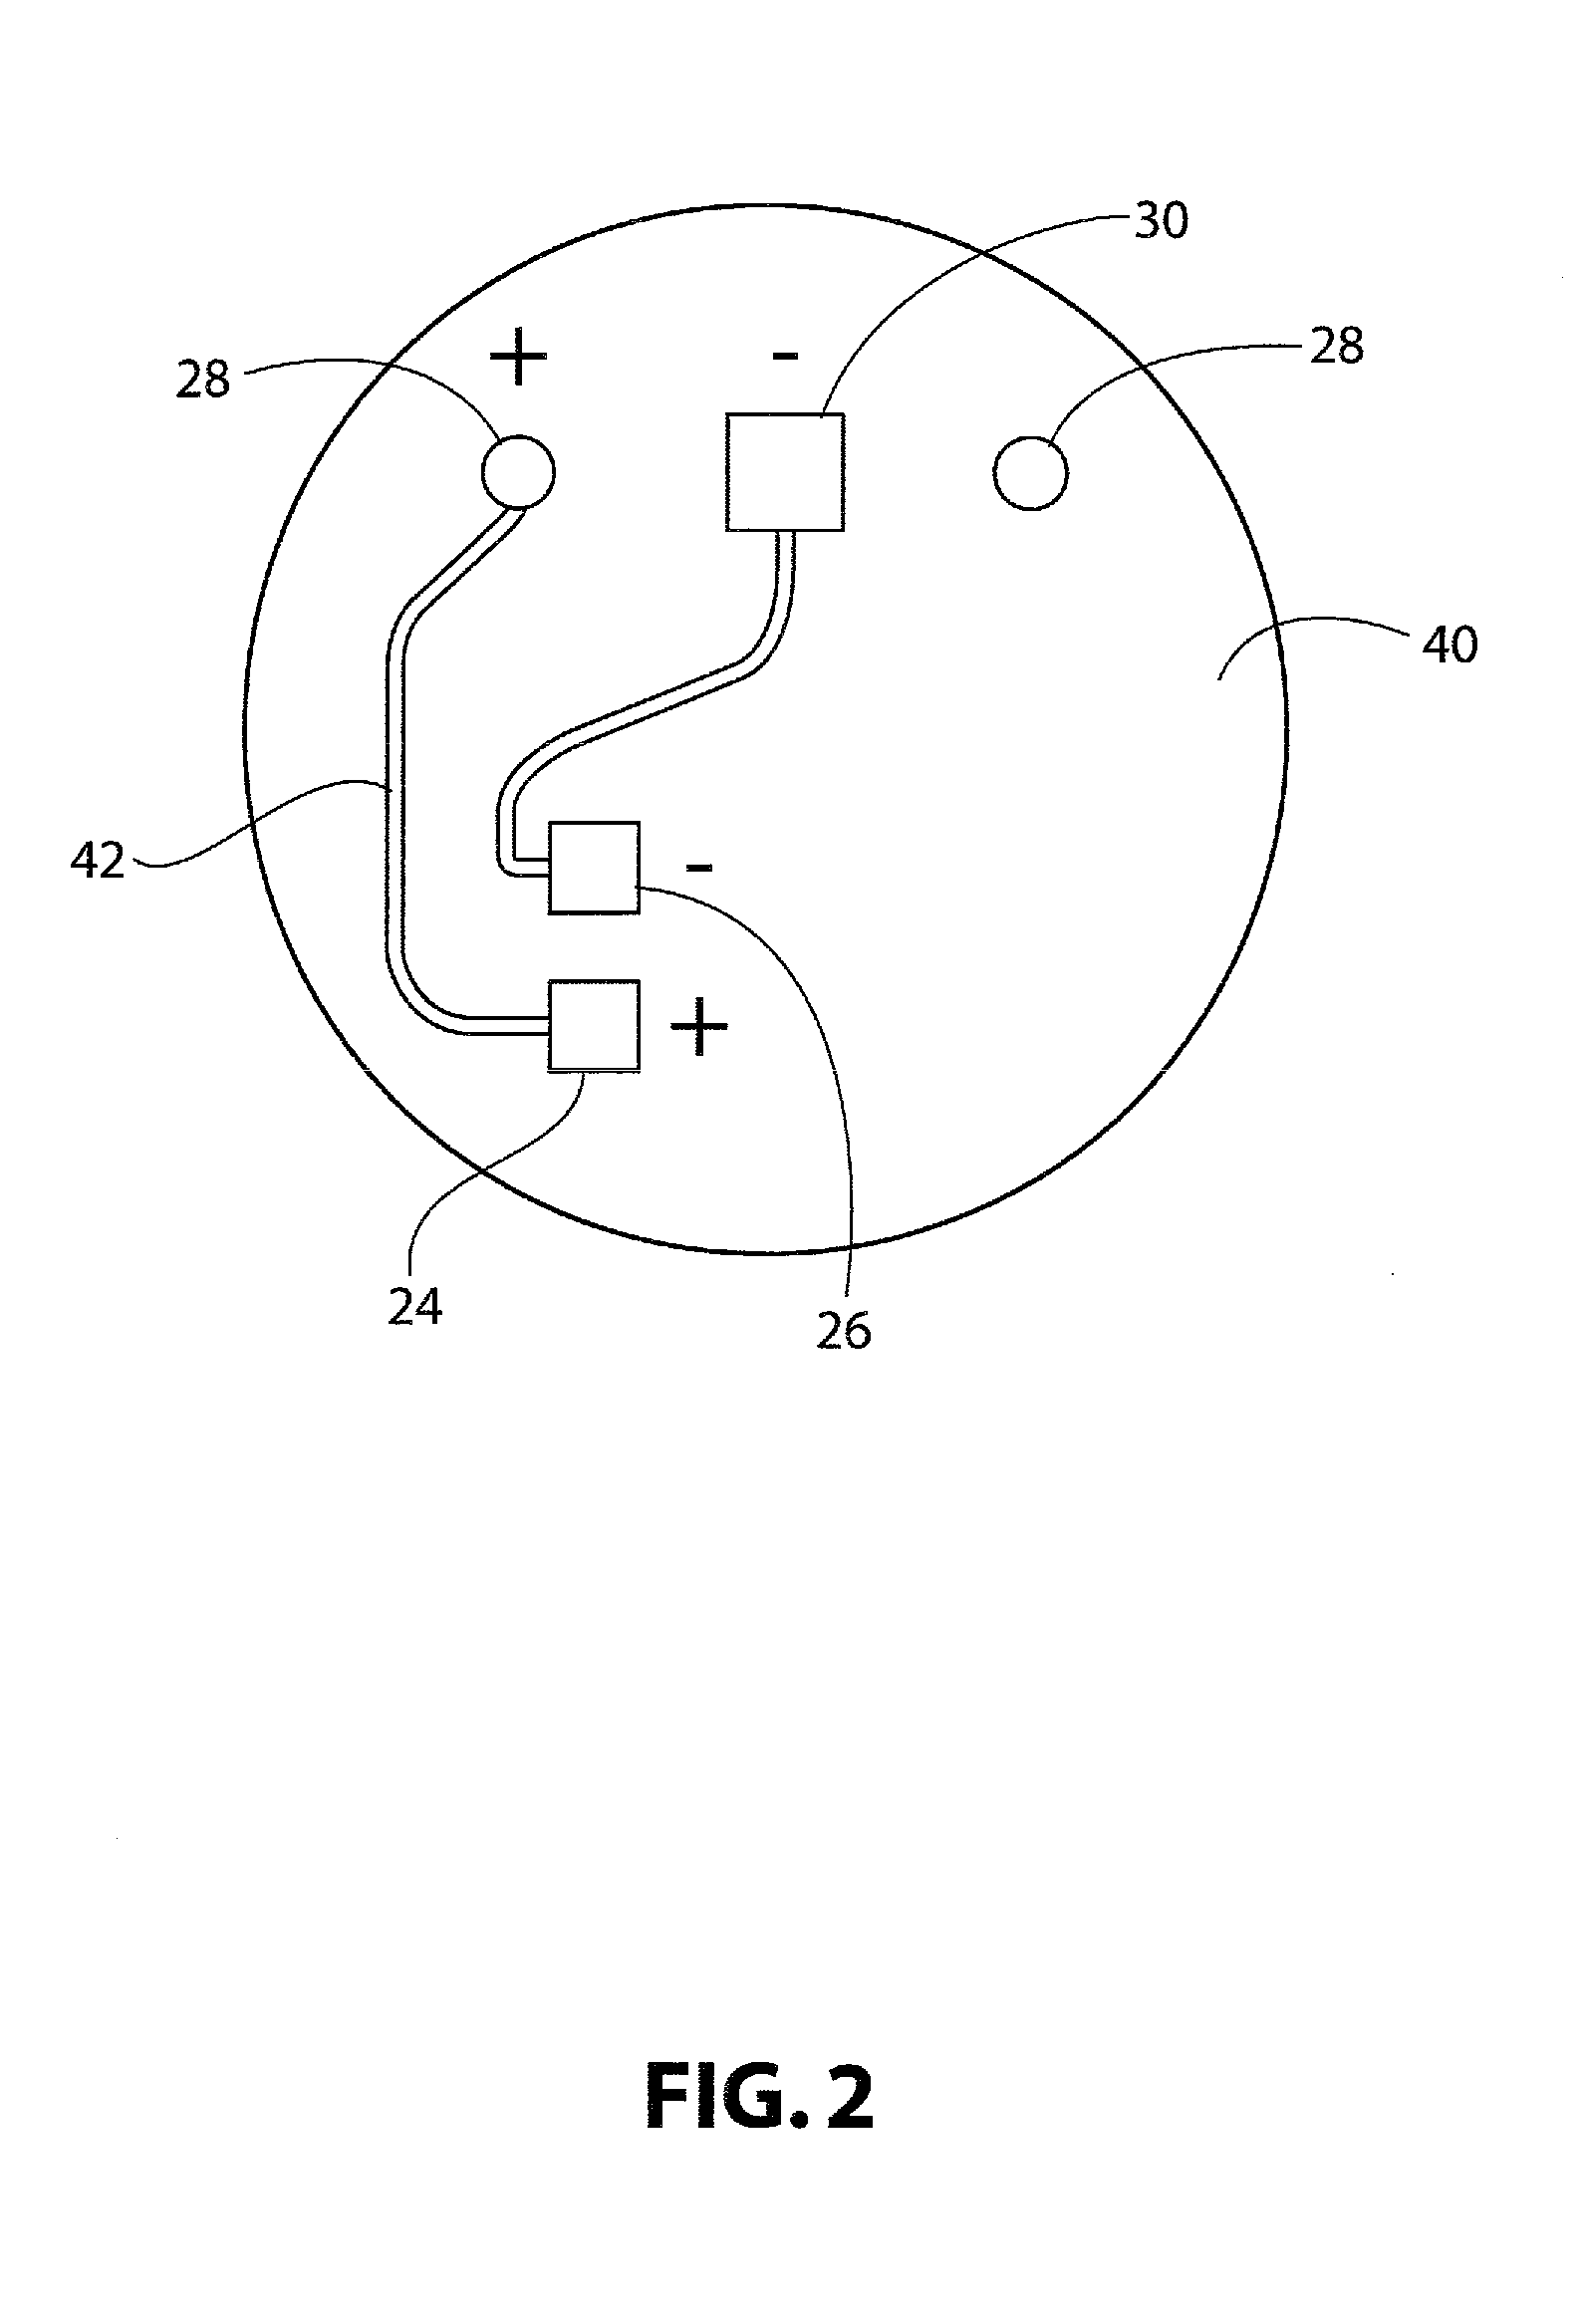 Pain Management Device and System